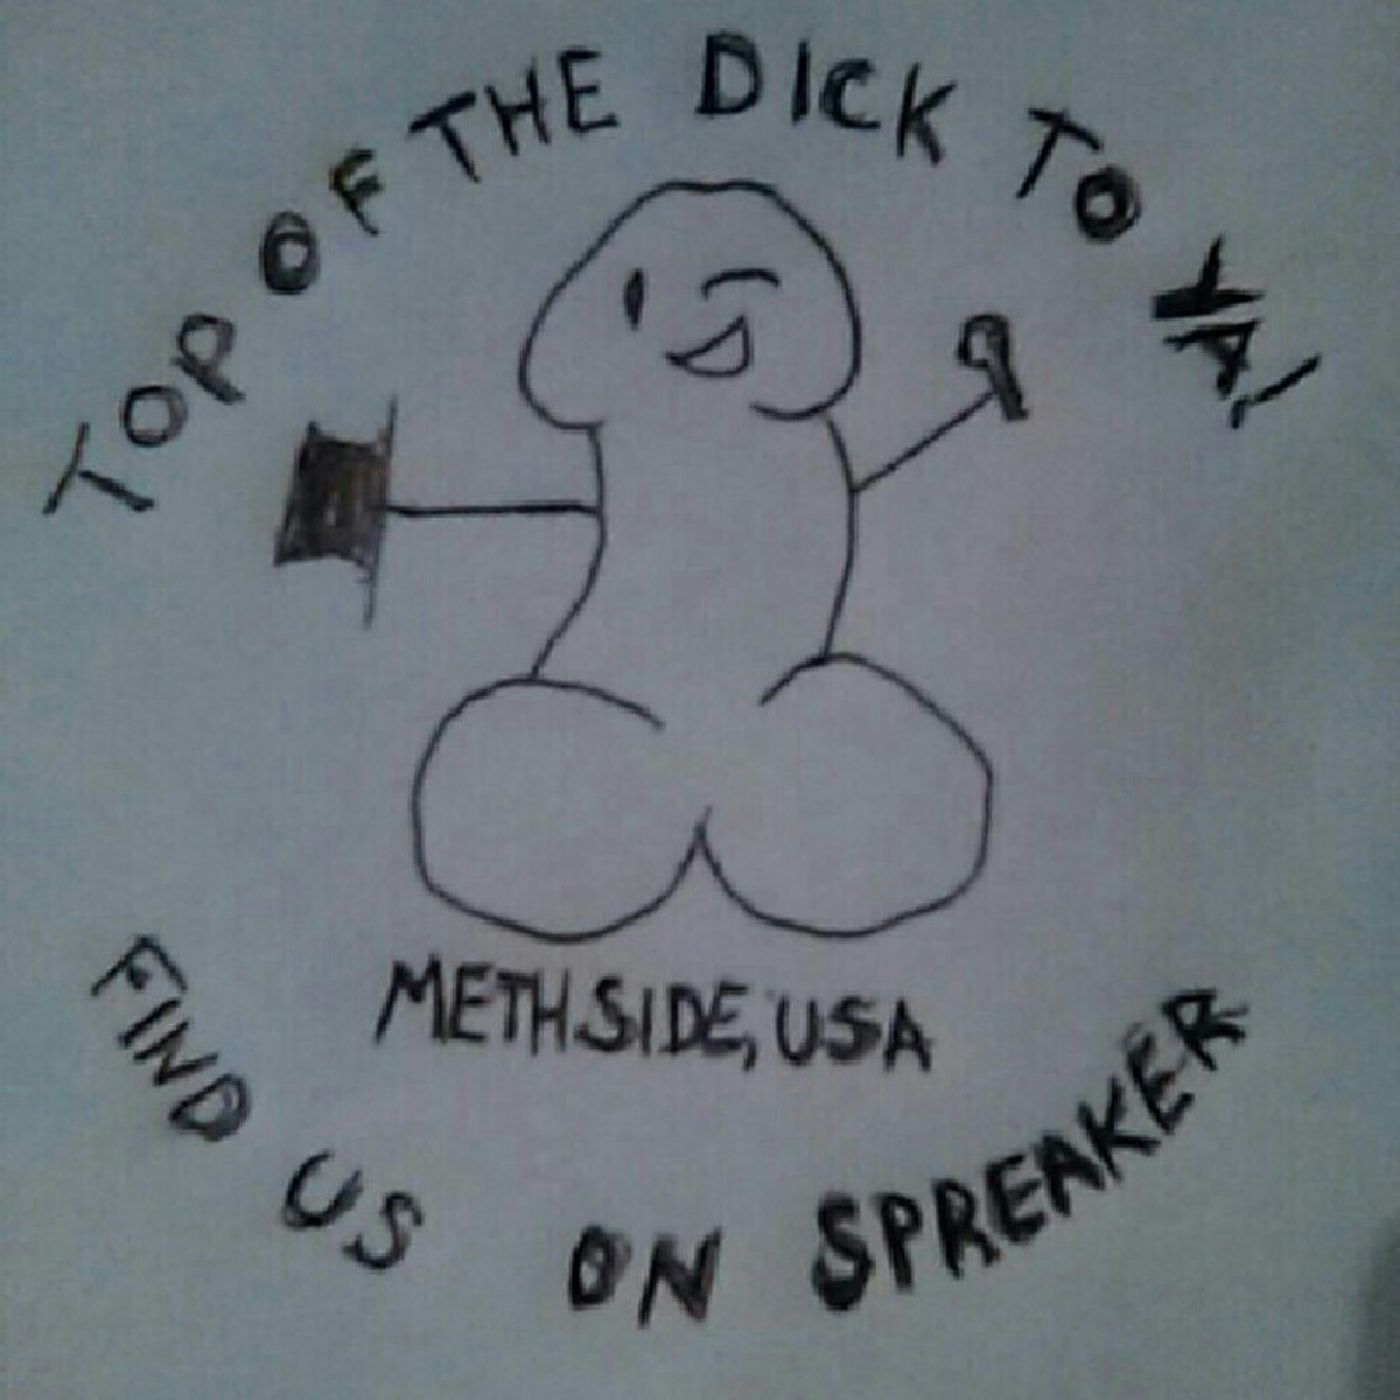 Top Of The Dick To Ya!